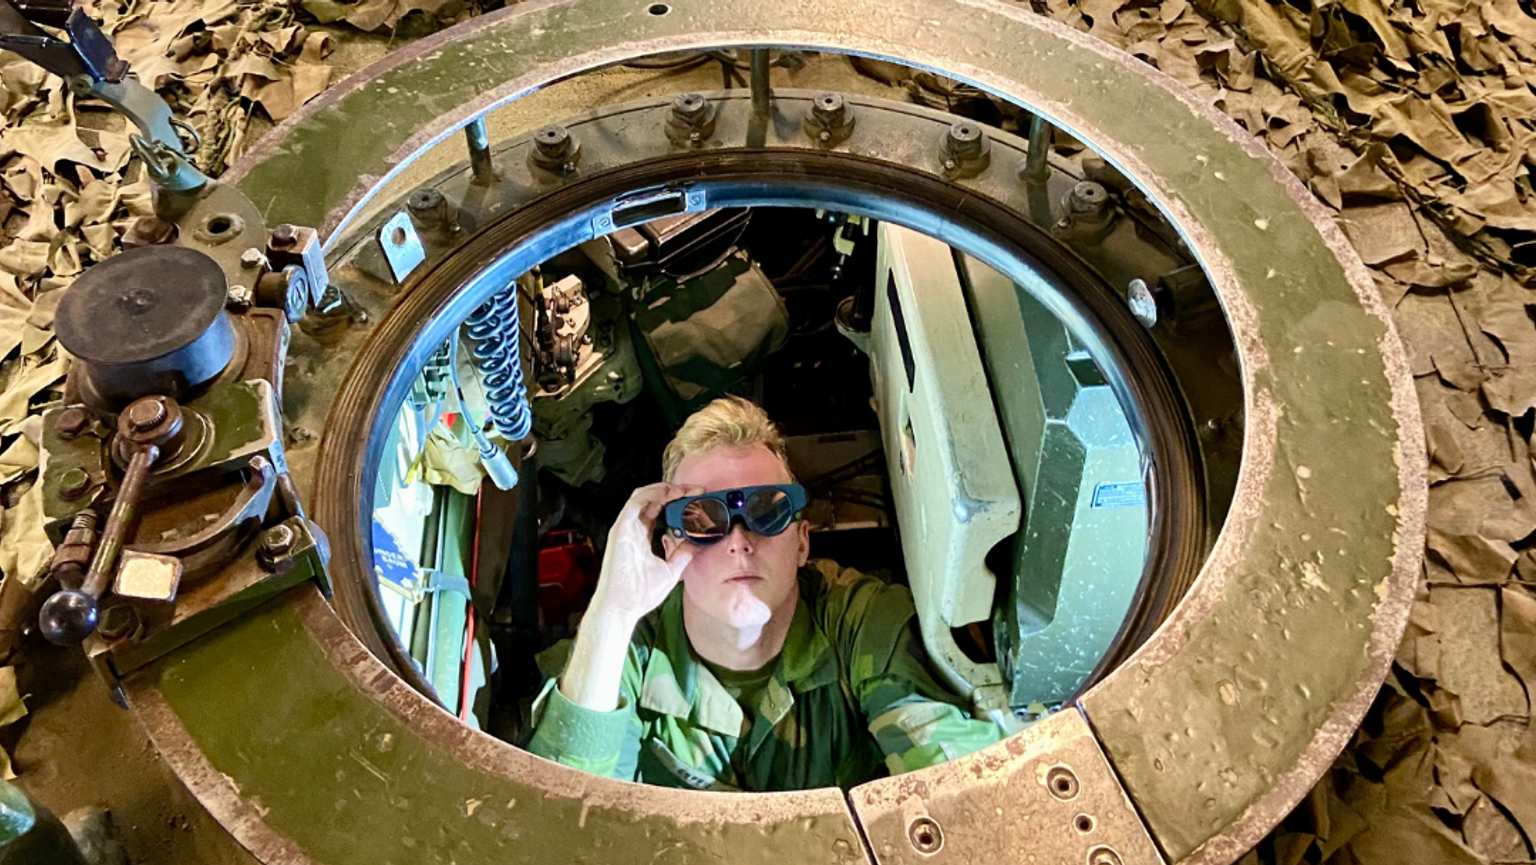 Commander using the AR-headset Magic Leap to align the digital twin to the real tank